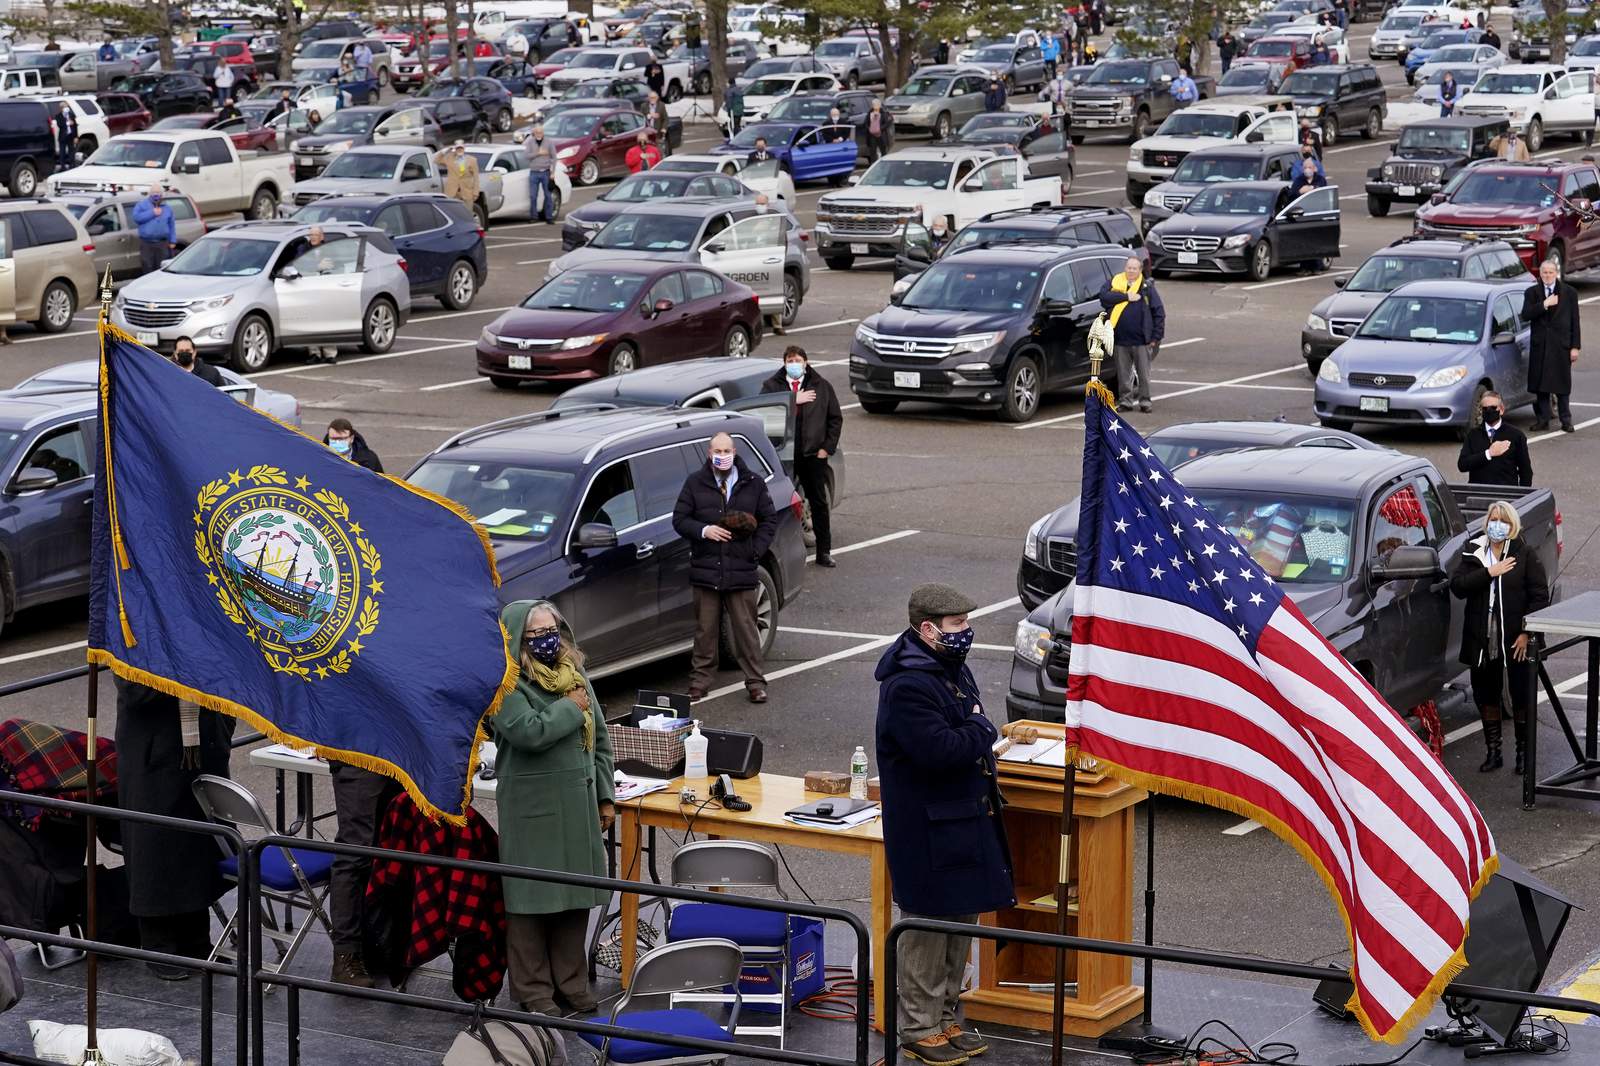 American idle: New Hampshire House holds drive-in session